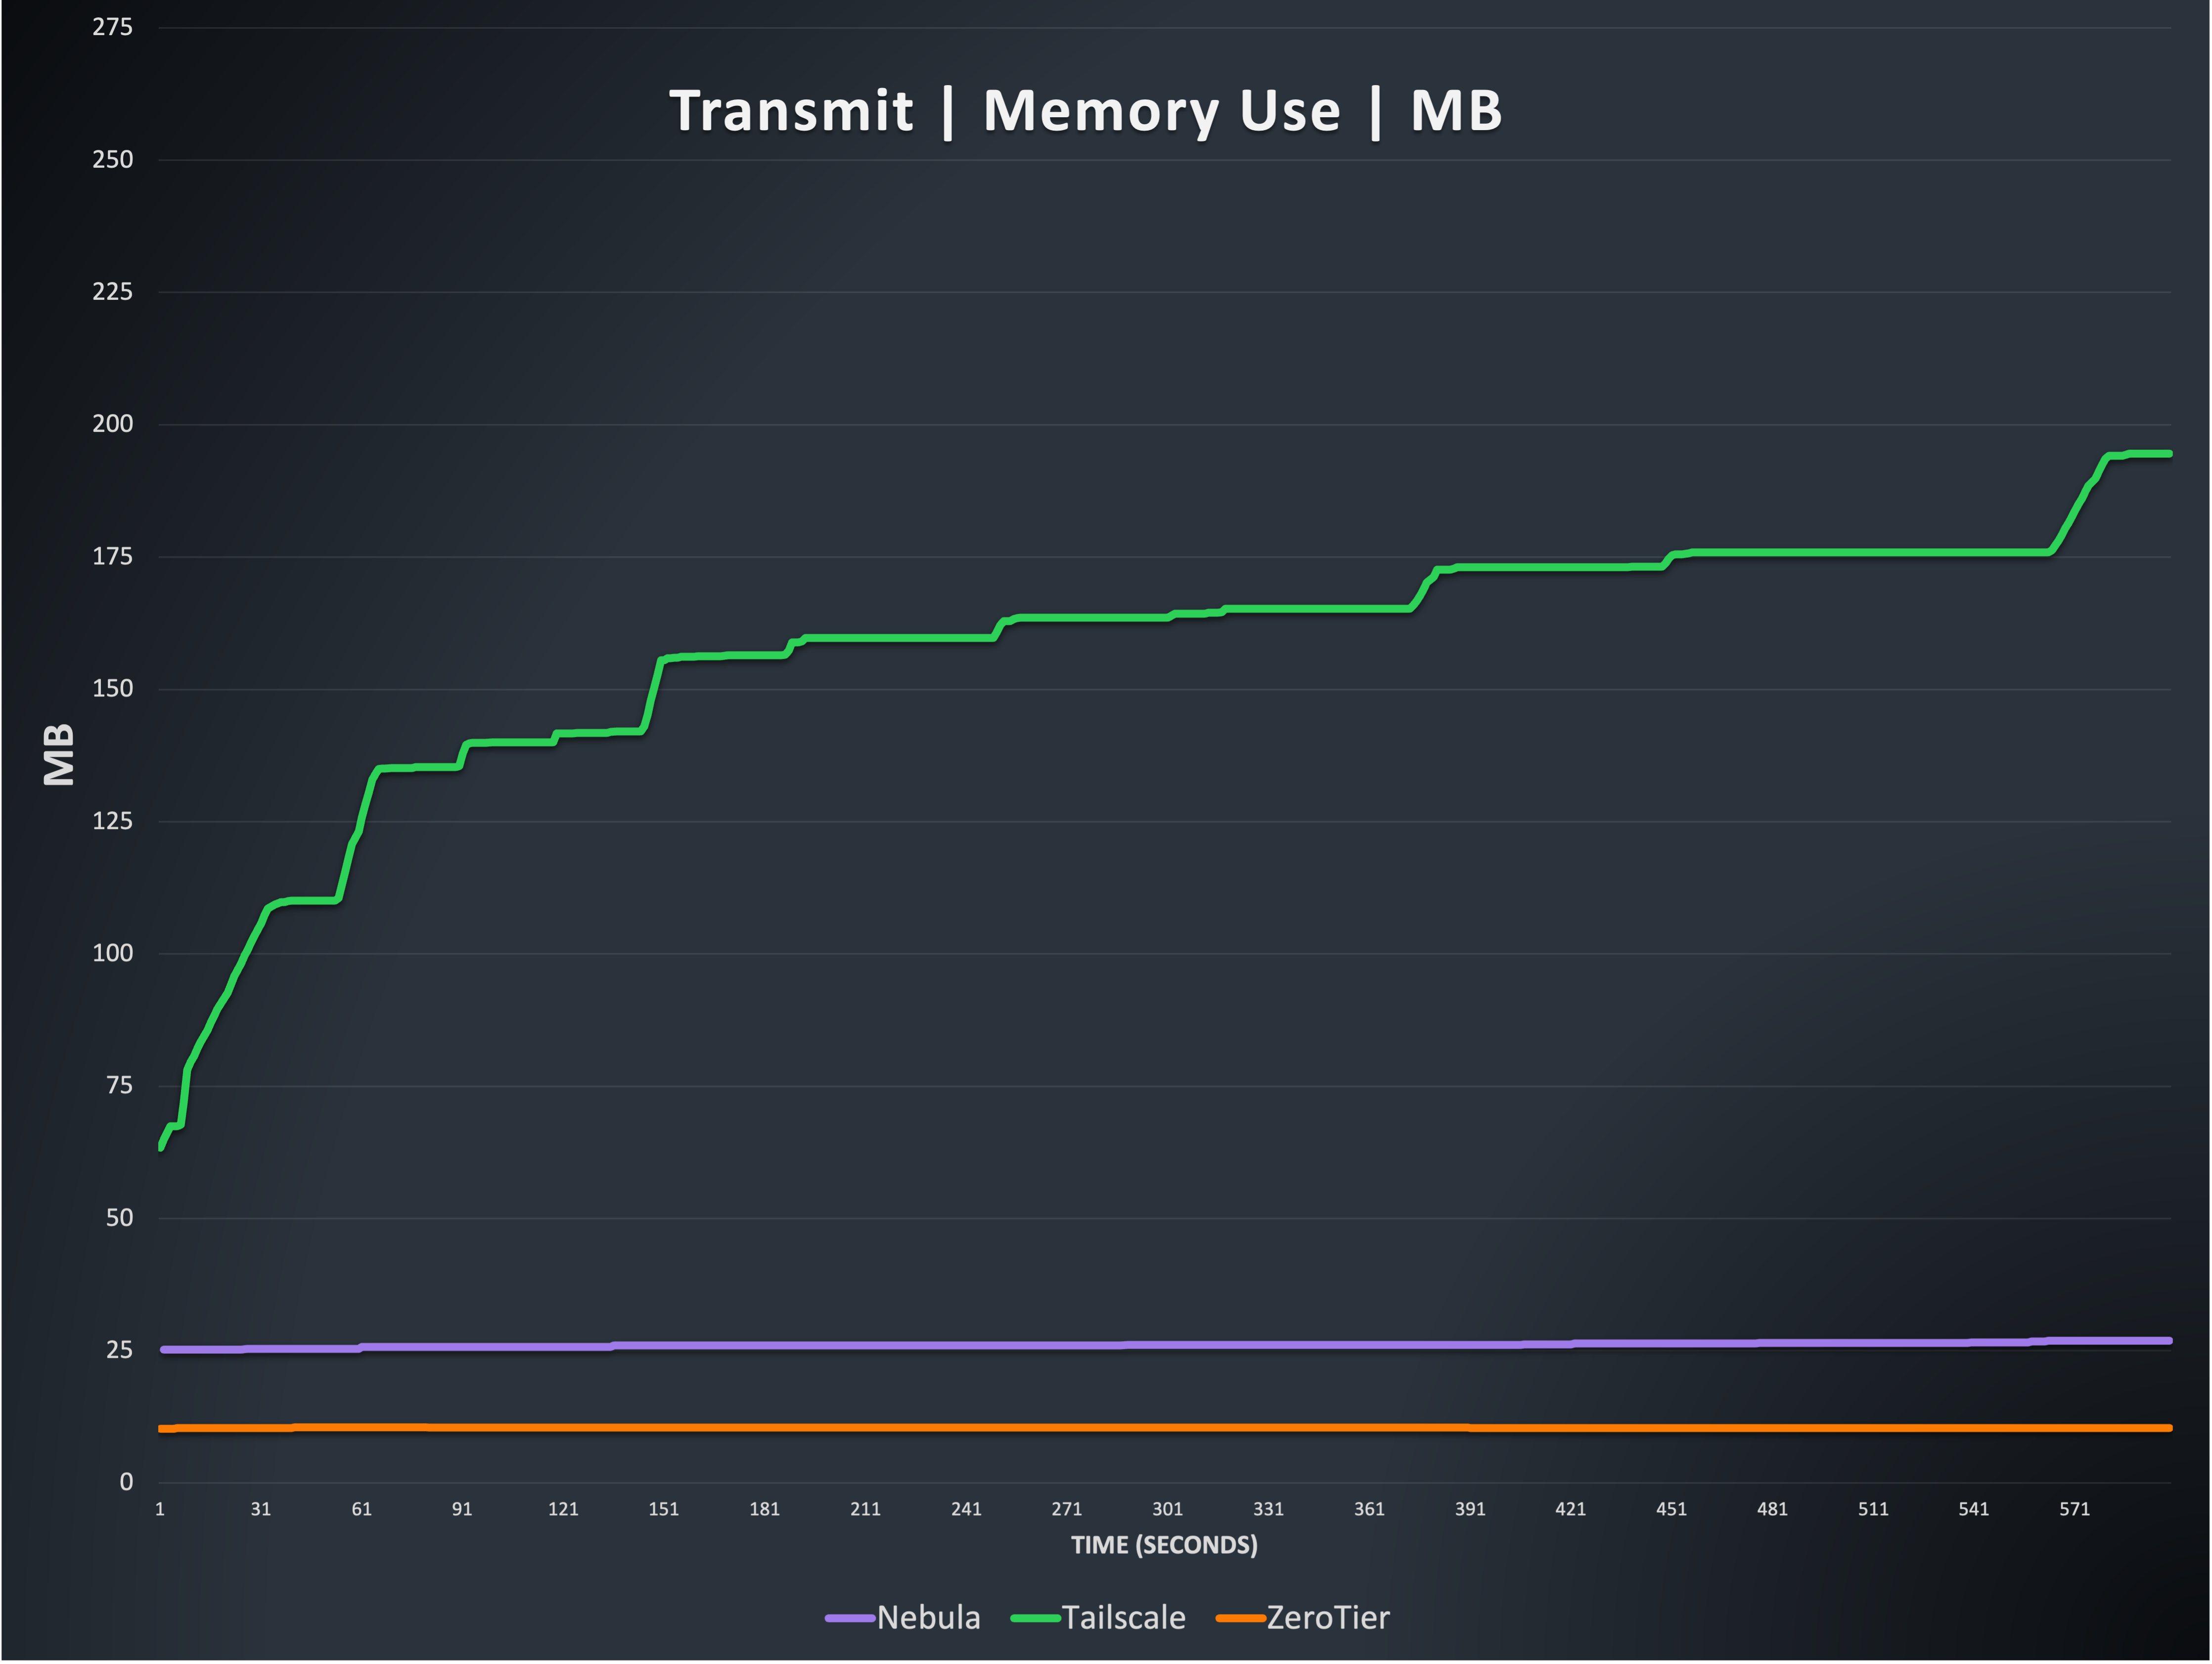 Line graph showing the memory usage of Nebula, Tailscale, and ZeroTier.  ZeroTier and Nebula hold steady, with ZeroTier at 10 MB and Nebula just above that at 27MB.  Tailscale's memory usage increases over the course of the test, ranging from about 60 MB at the start to nearly 200MB at the end of the 10 minute test.